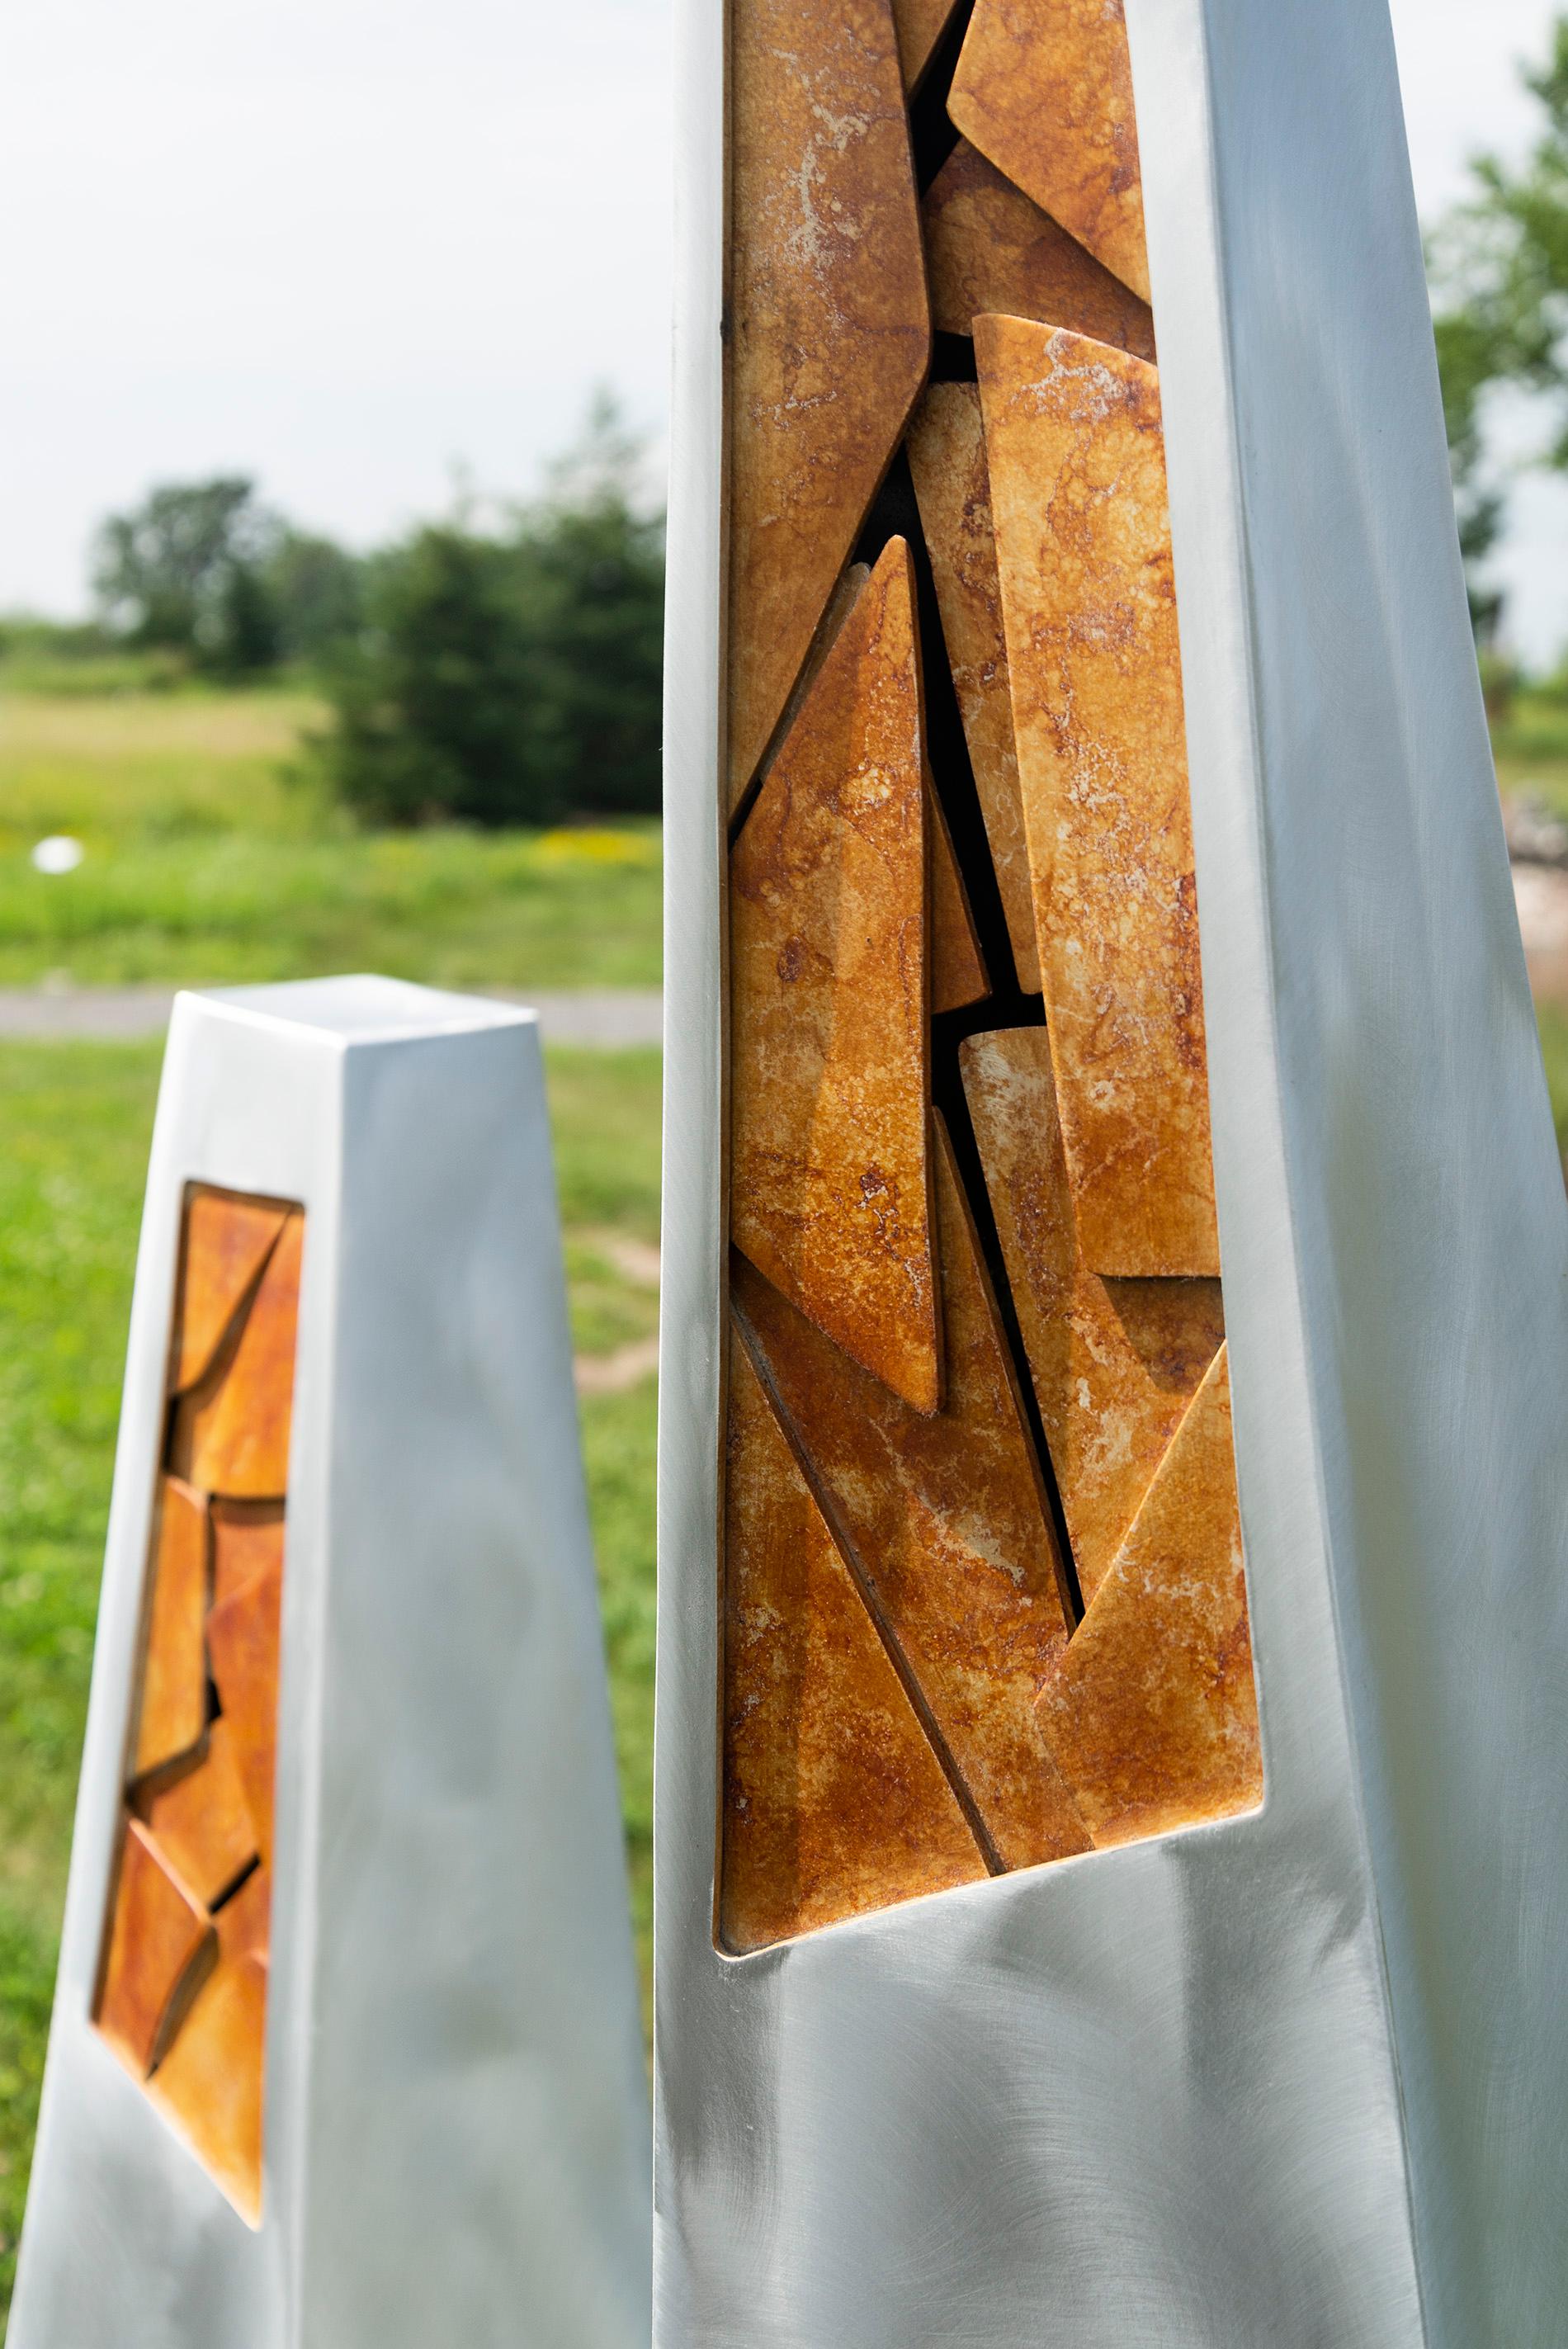 Generation - tall, modern, abstract, contemporary, aluminum outdoor sculpture - Gray Abstract Sculpture by Stephane Langlois